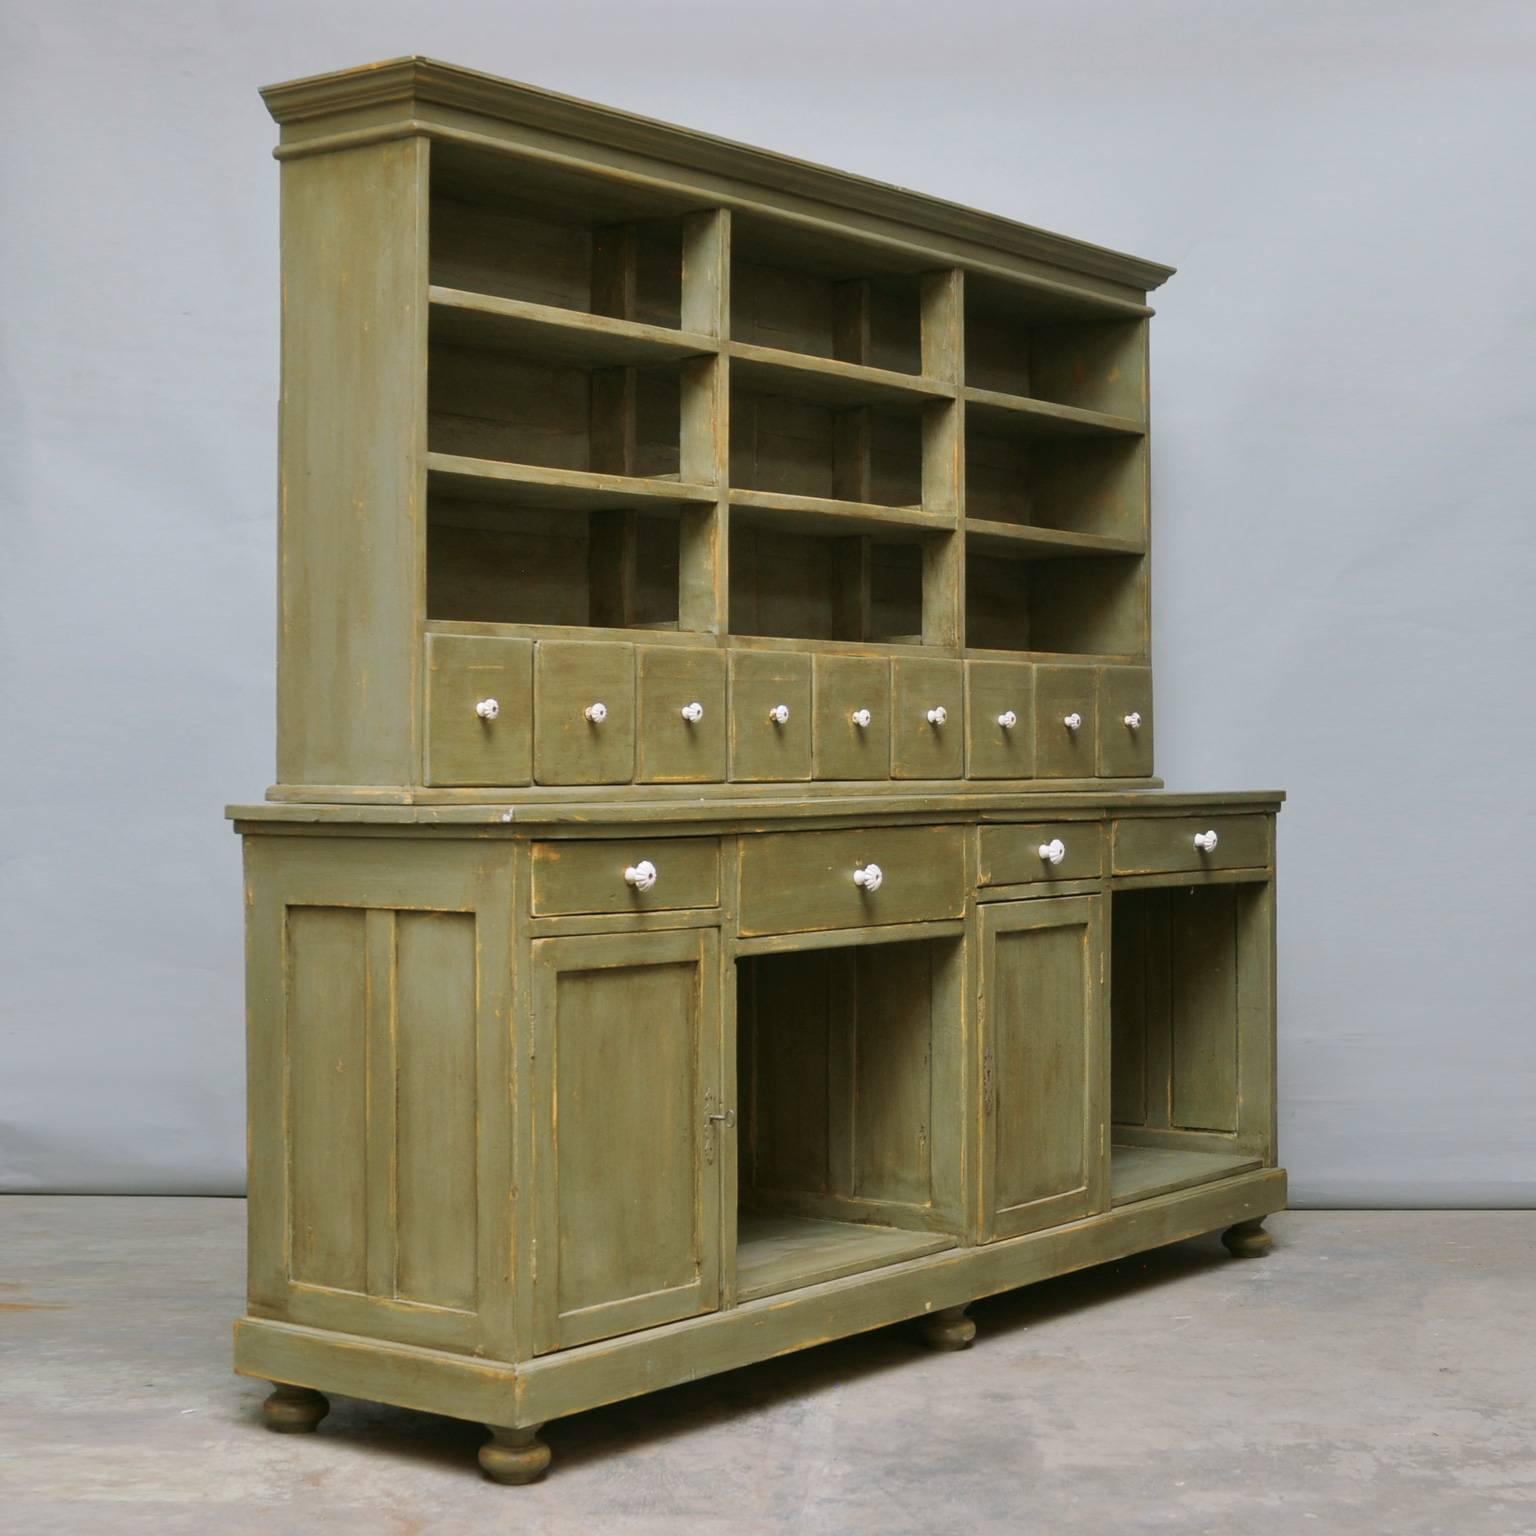 Rustic Pine Cupboard from the 1930s